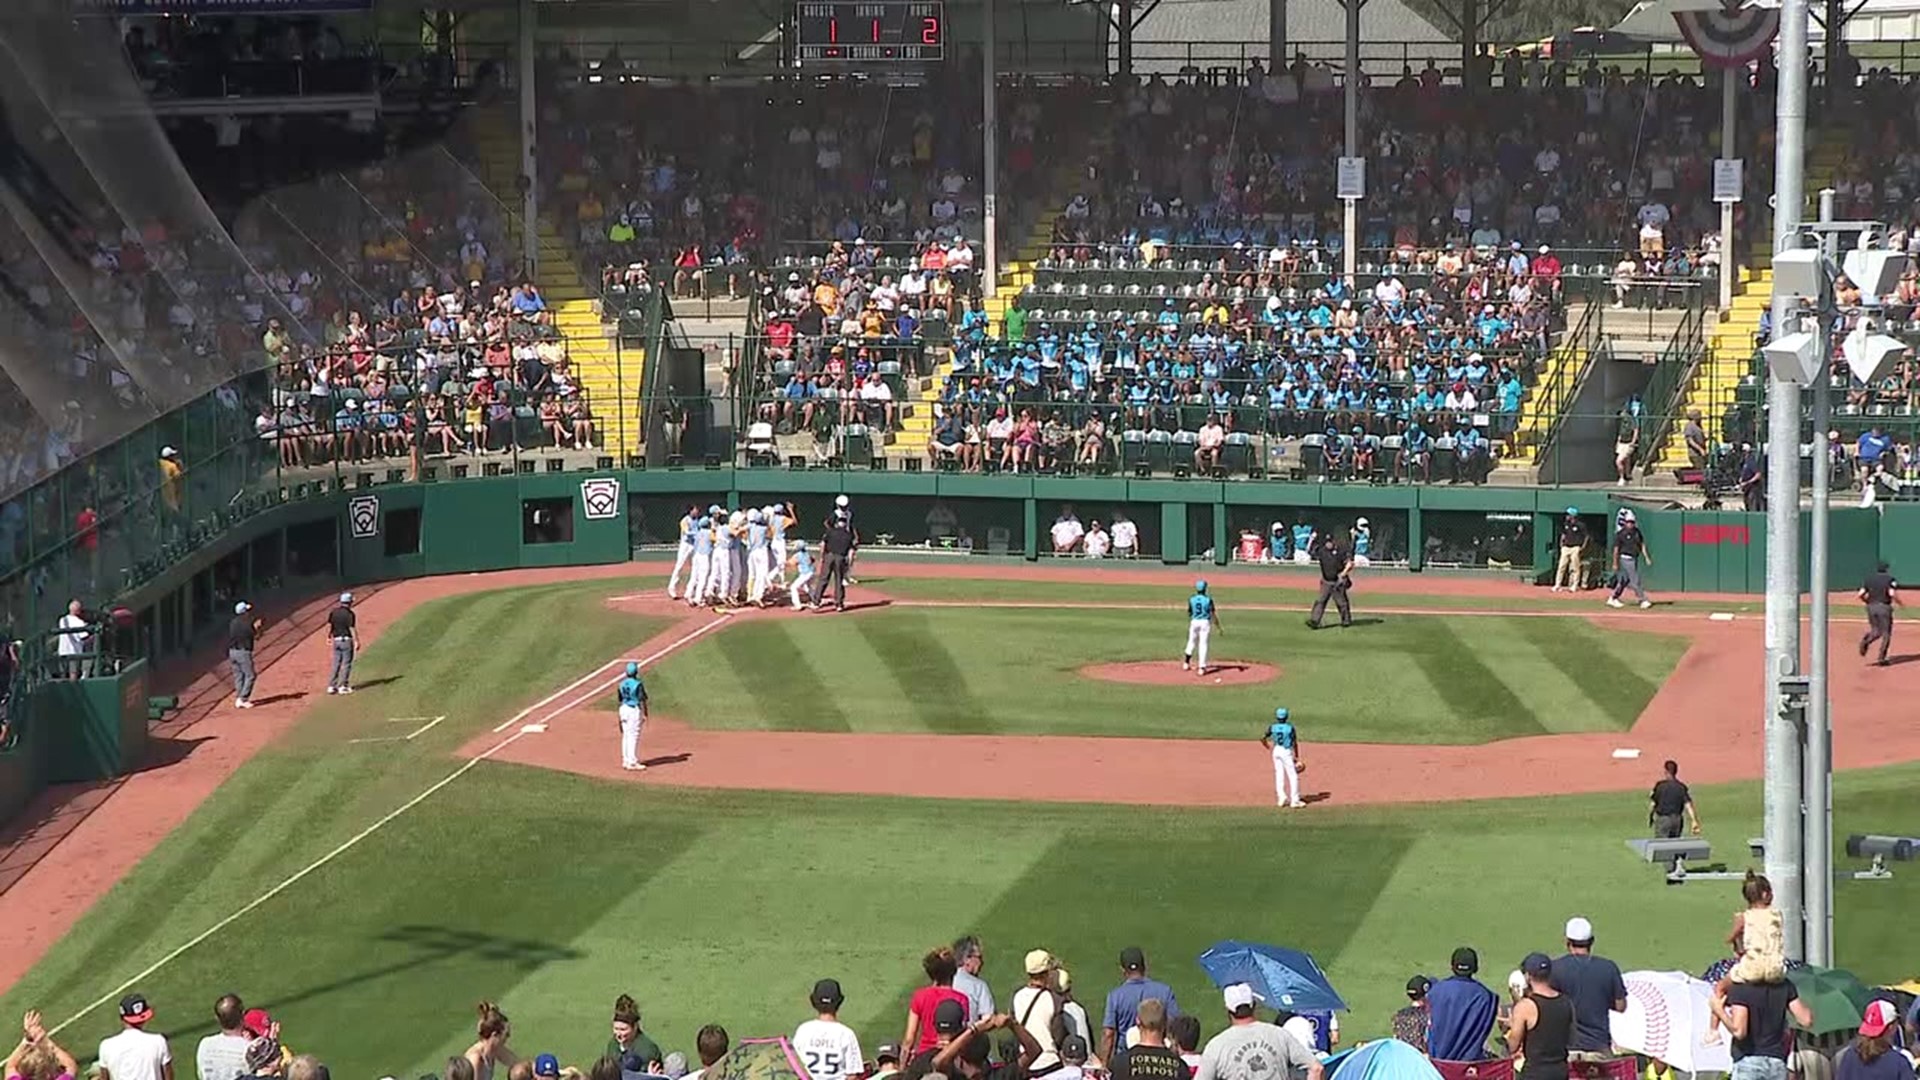 For nearly two weeks, the spotlight shined on South Williamsport for the Little League World Series, and on Sunday, Hawaii came out on top beating Curacao 13-3.